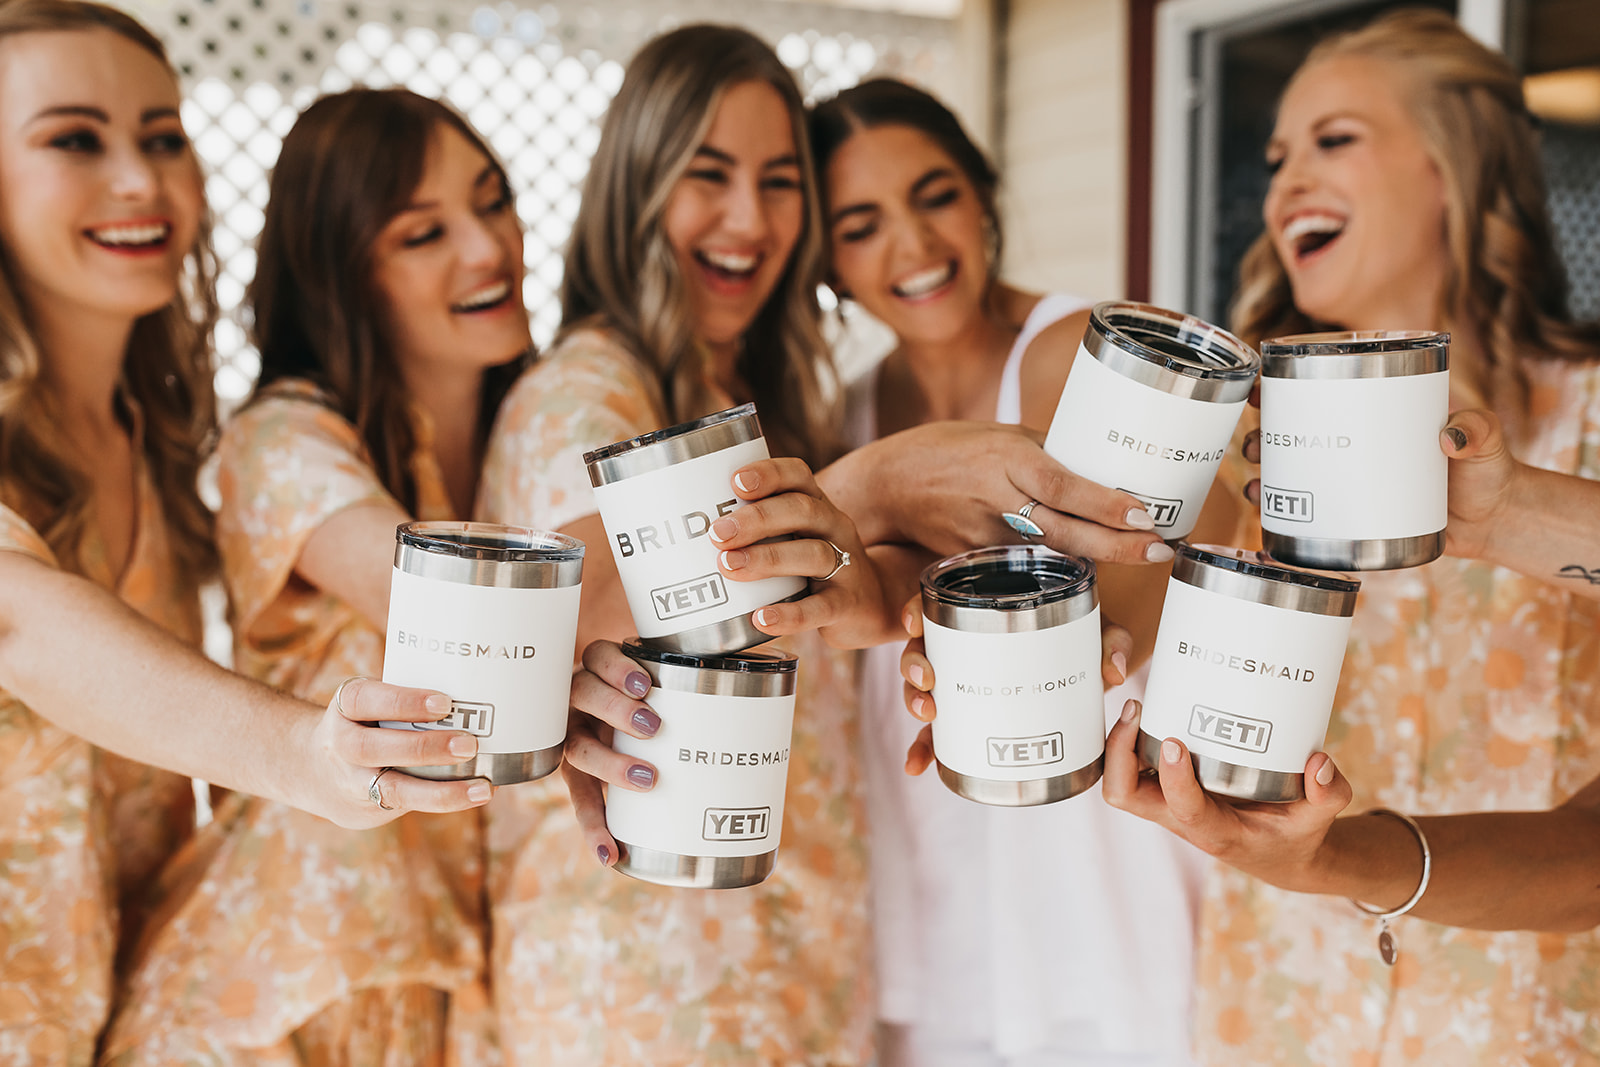 Bride and bridesmaids sharing a drink and laughs while getting ready with custom Yeti cups at private lake house.